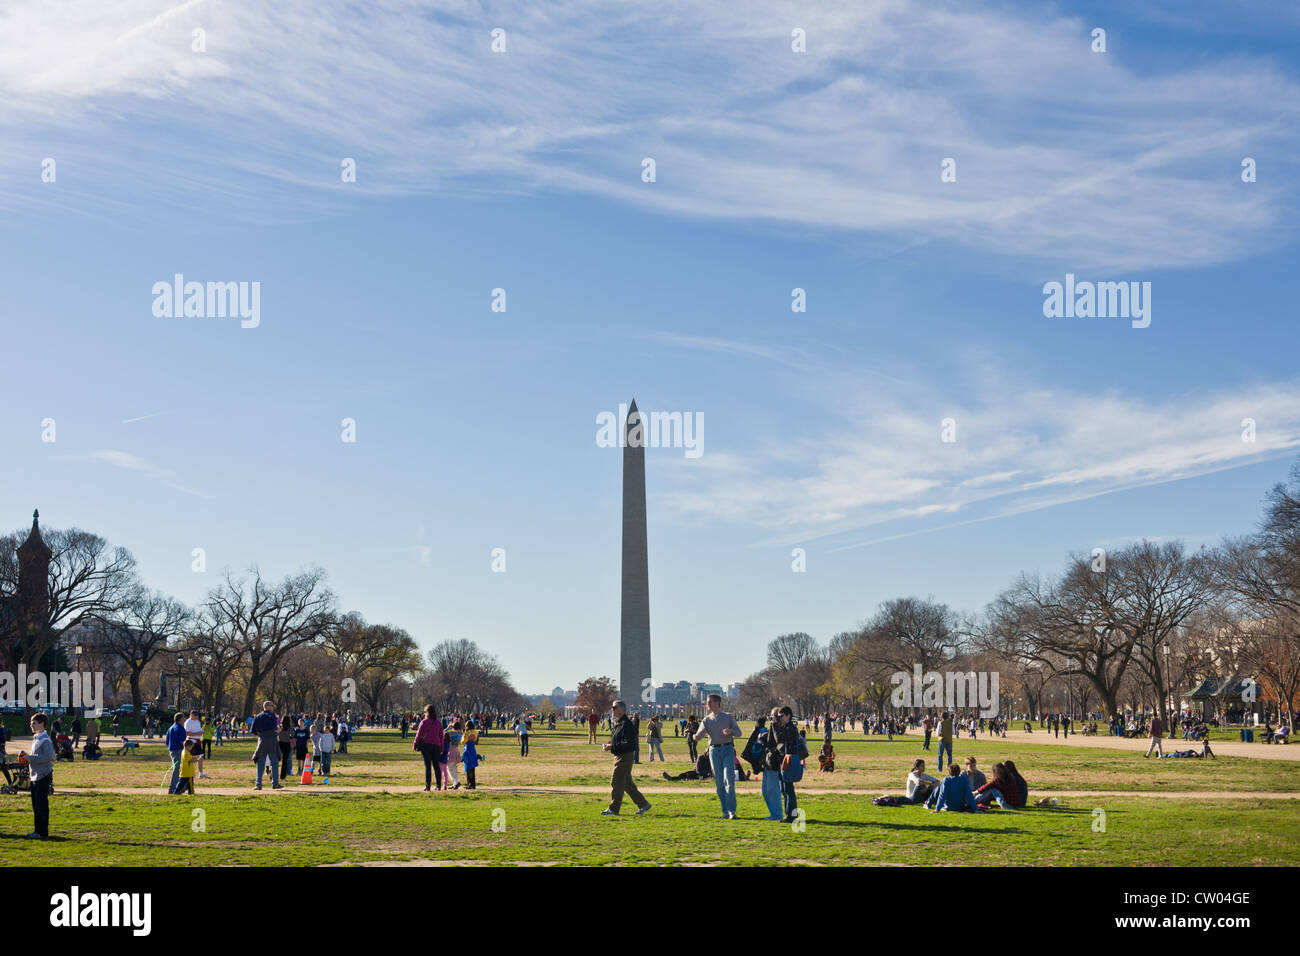 Crowds enjoying a mild winter day on the National Mall, Washington DC, Monument behind. Stock Photo